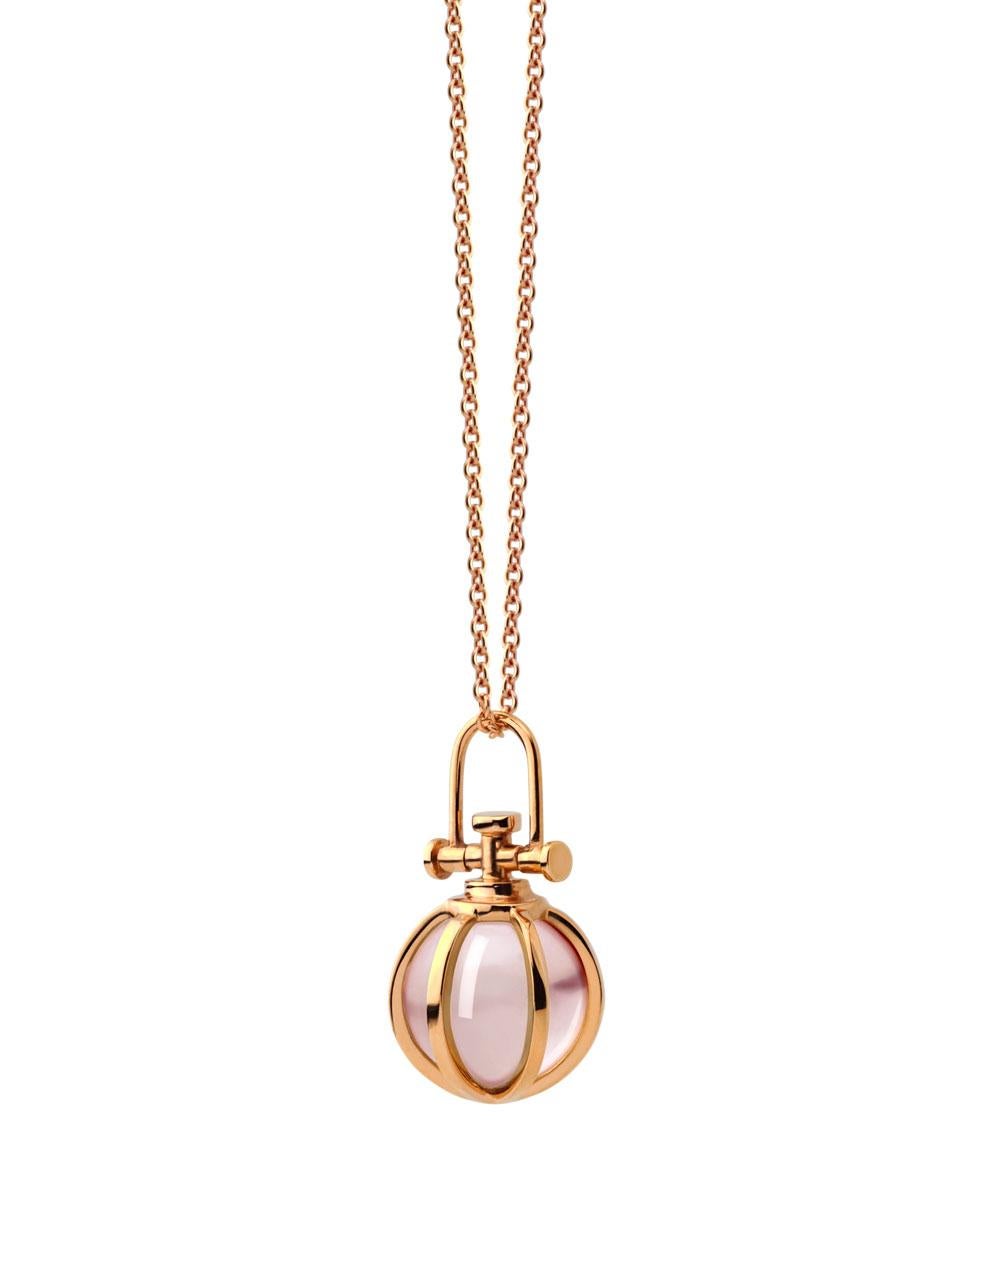 Rebecca Li designs mindfulness. 
This dainty orb necklace is from her Crystal Ball Collection.
Rose quartz means Love & Happy

Pendant:
Metal Type: 18K Rose Gold
Gemstone: Natural Rose Quartz
Pendant Size: 9 mm W * 9 mm D * 17 mm H
Gemstone Size: 8